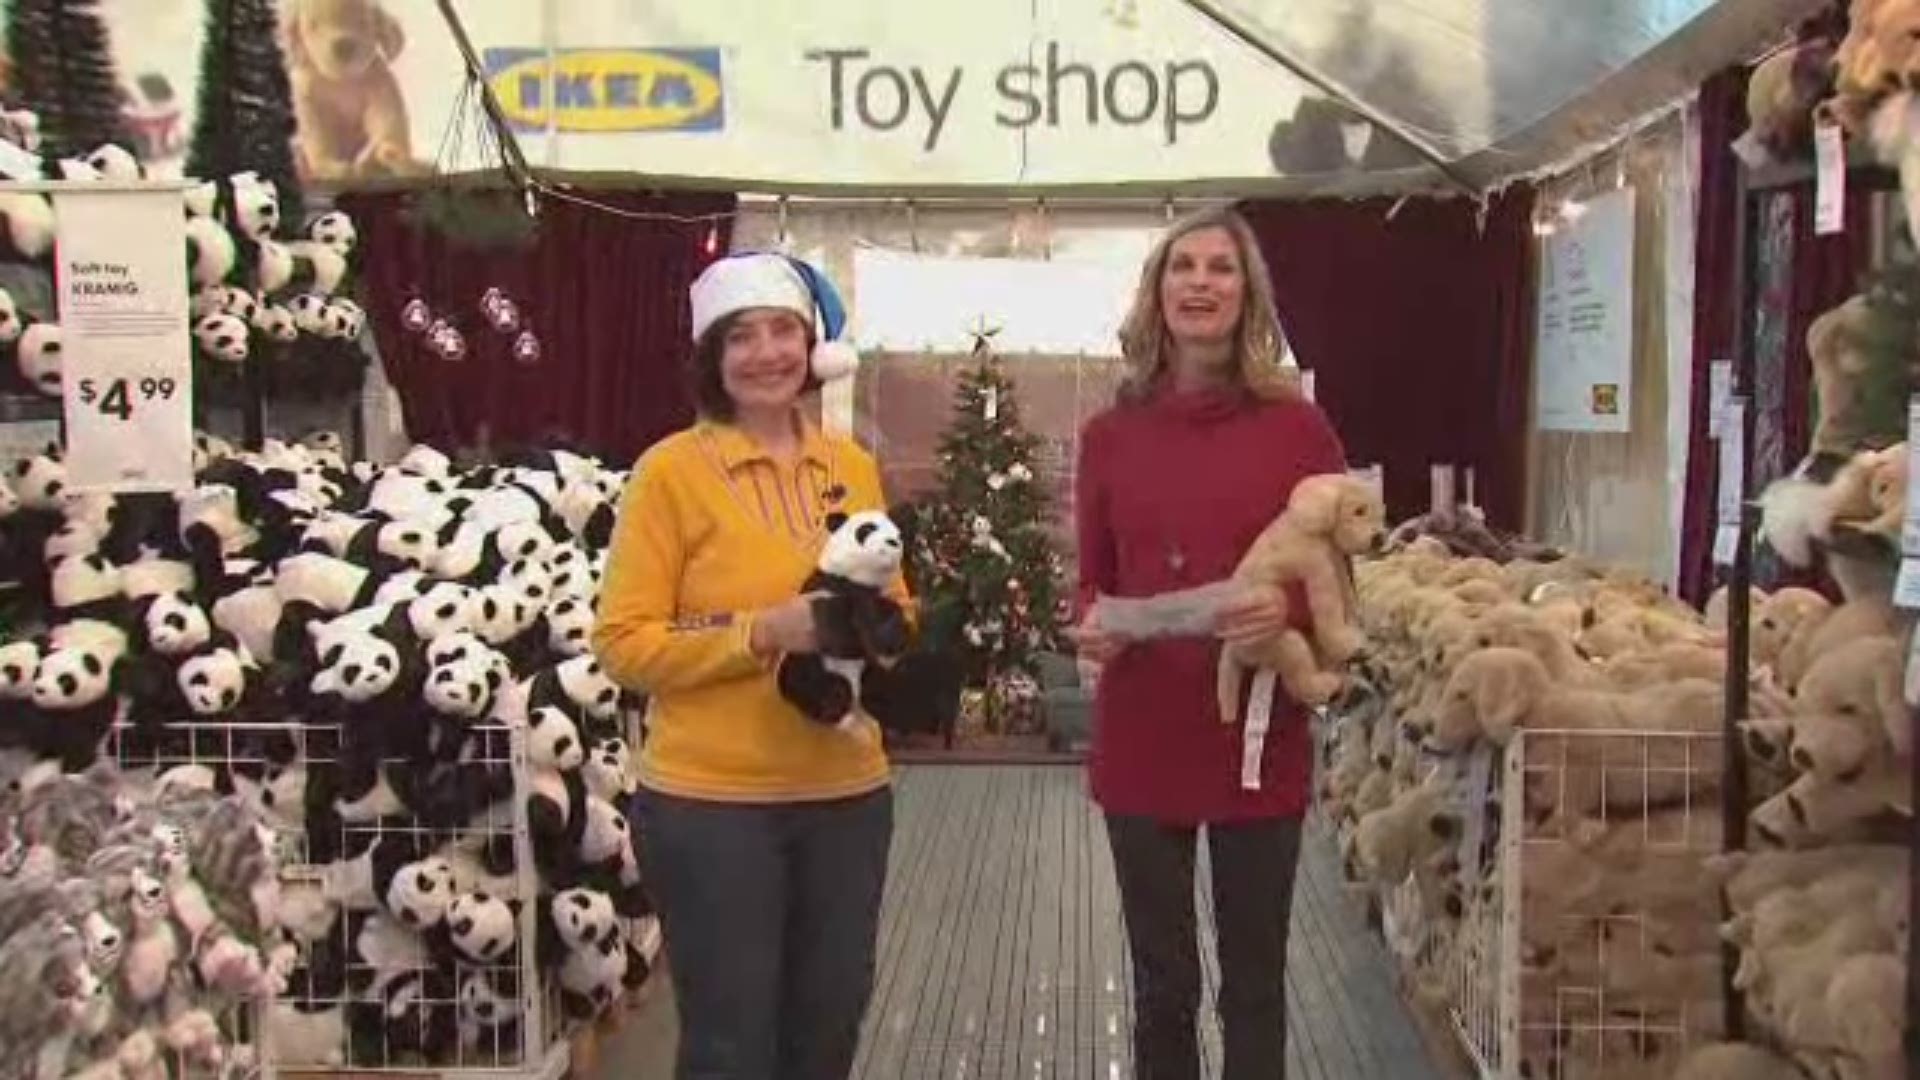 IKEA: IKEA Toy Shop and Let's Play for Children Campaign